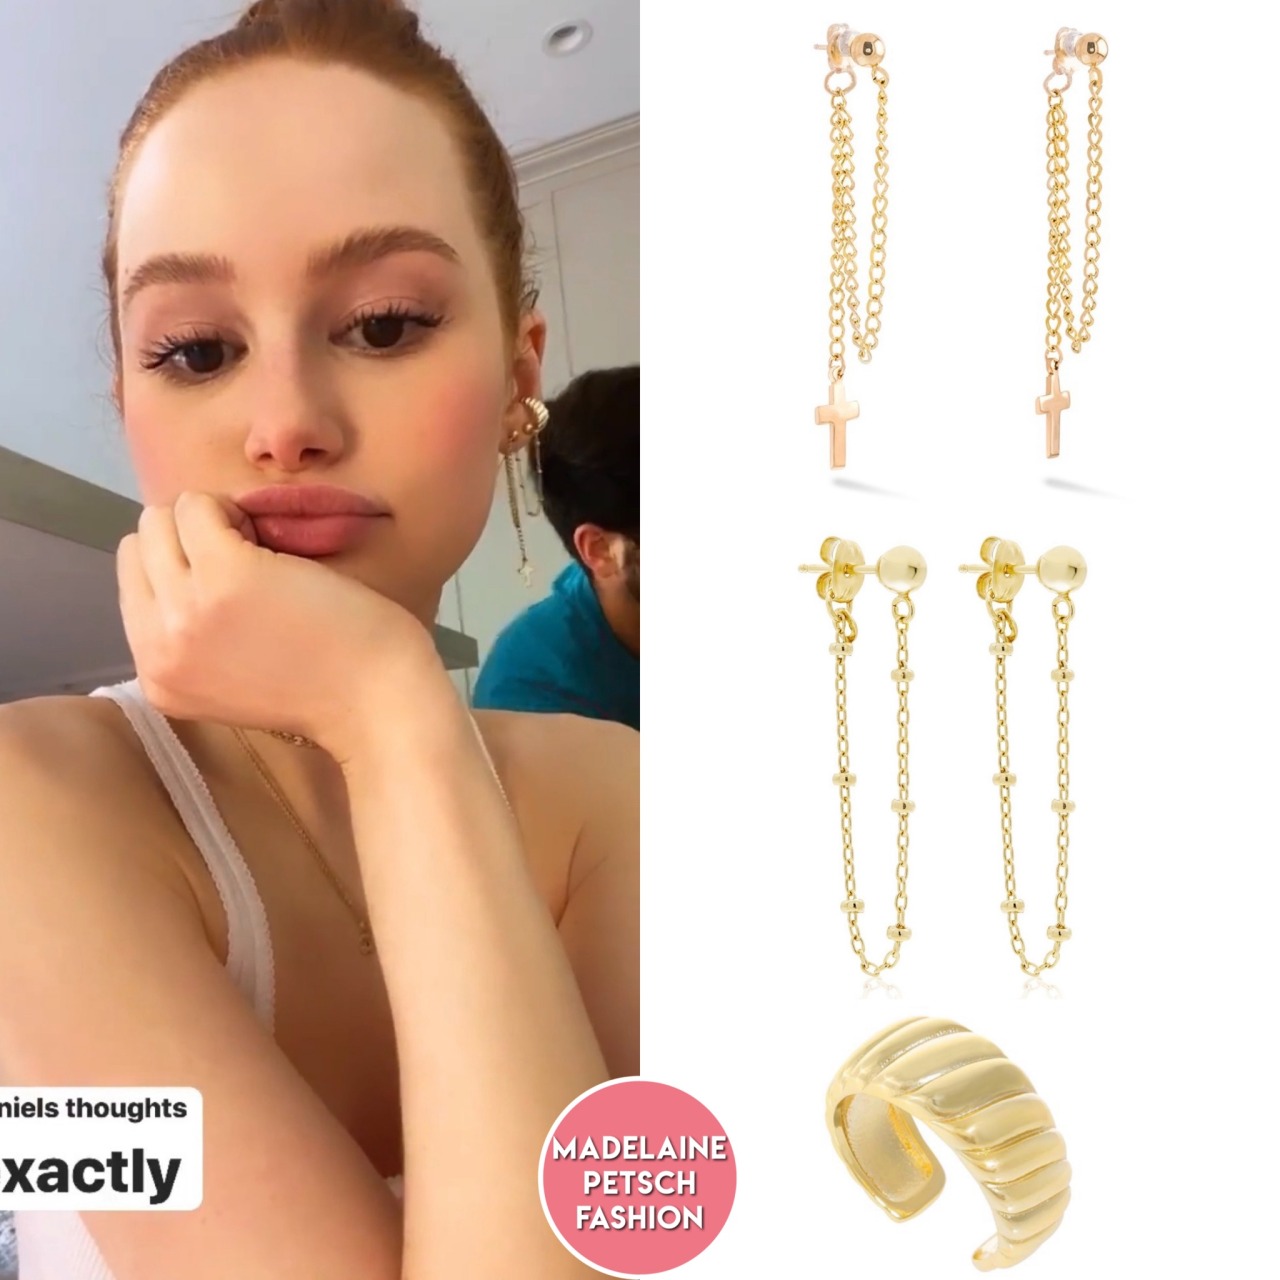 Madelaine Petsch Fashion — Instagram Story. Madelaine wore the Stone And